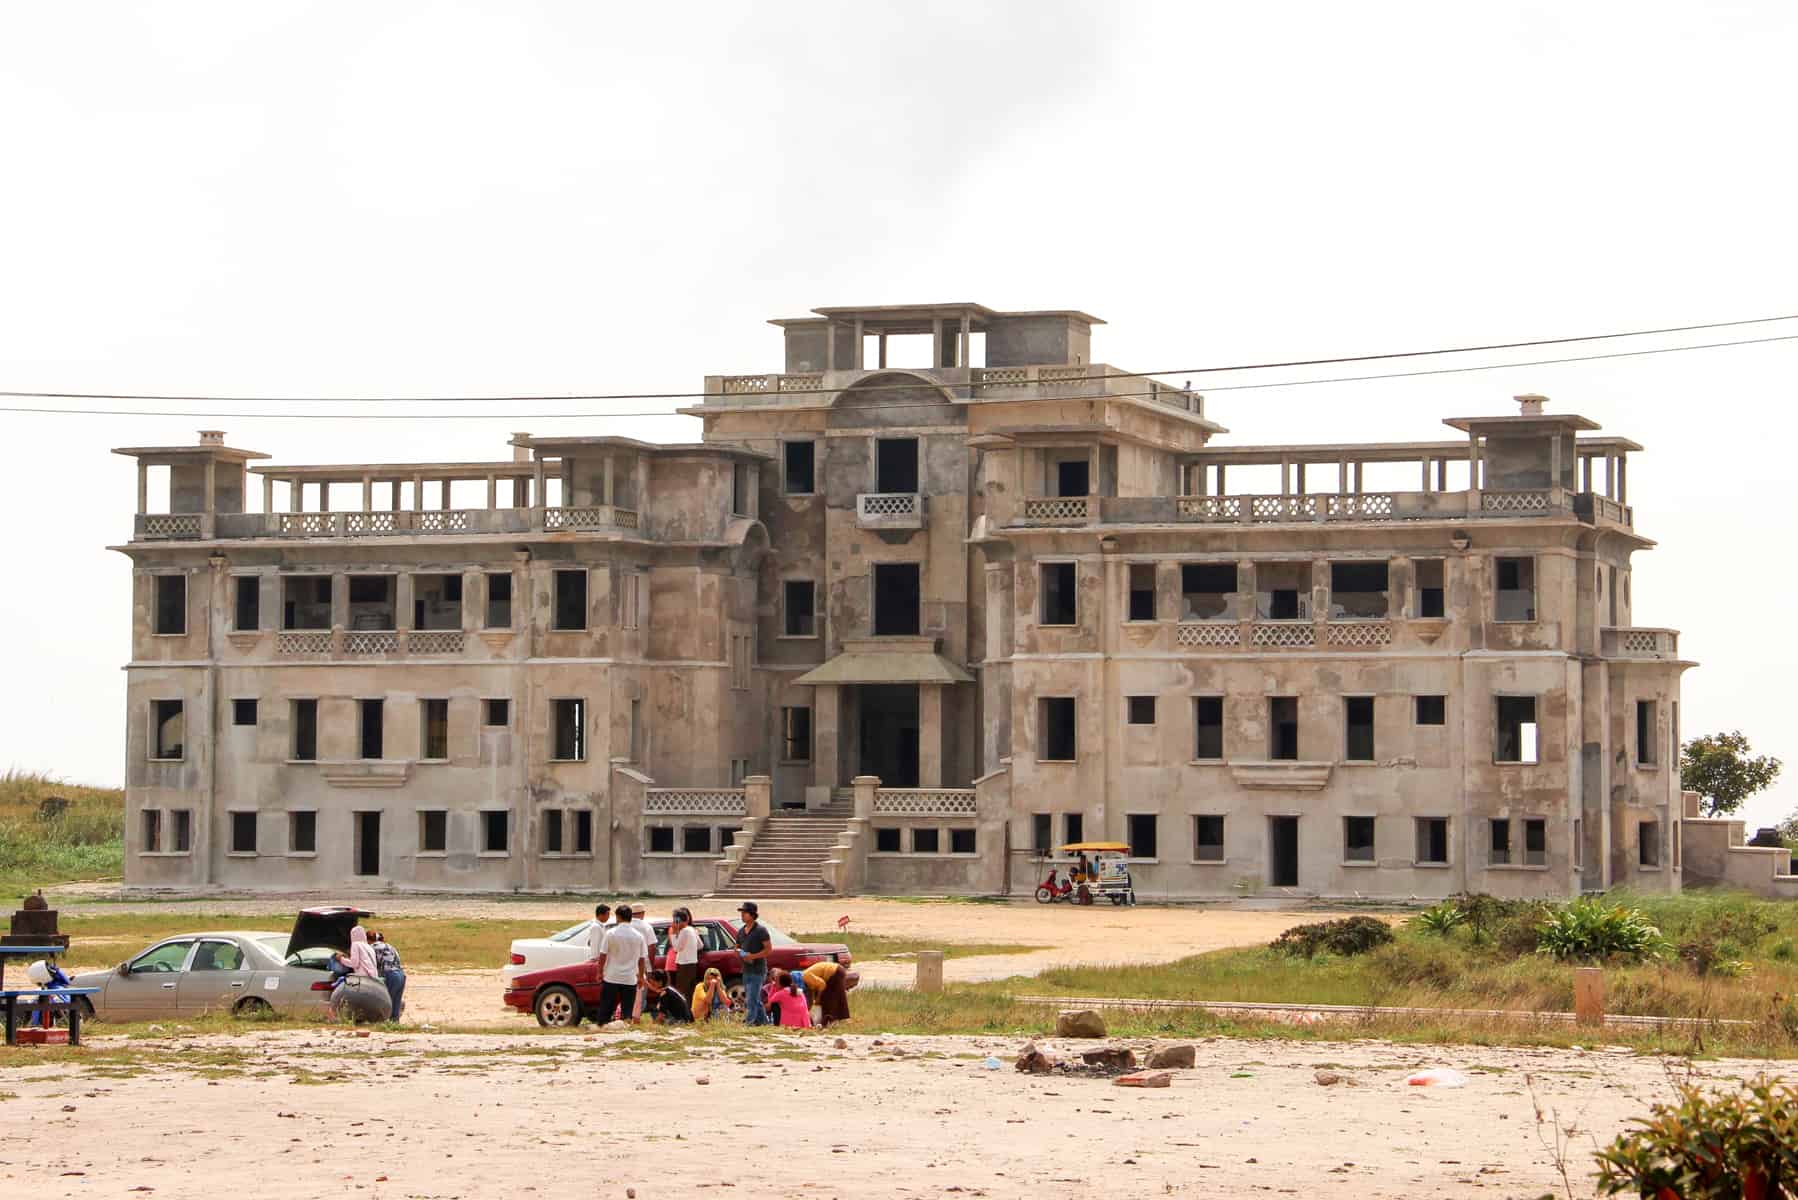 An abandoned hotel building that was part of the planned Boker Hill Station resort complex in Kampot, Cambodia.